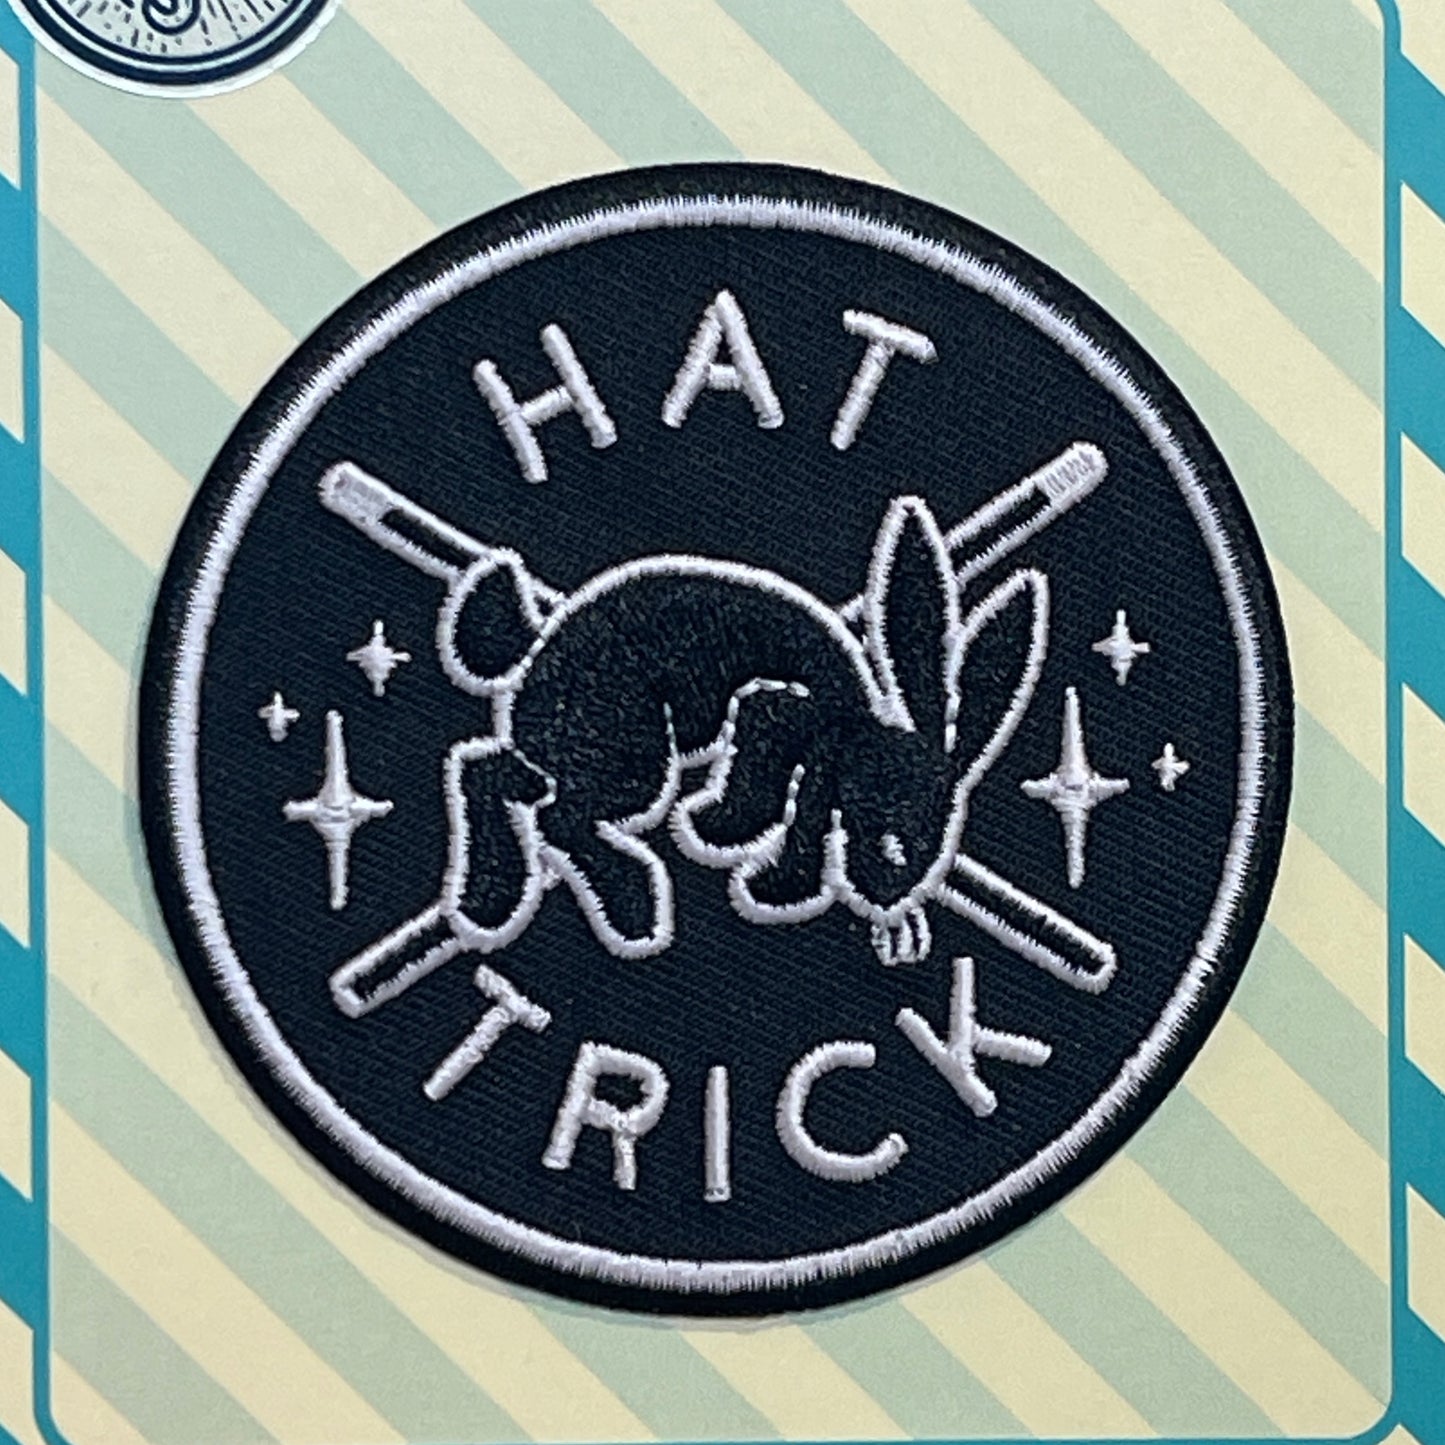 Hat Trick Fabric Patch